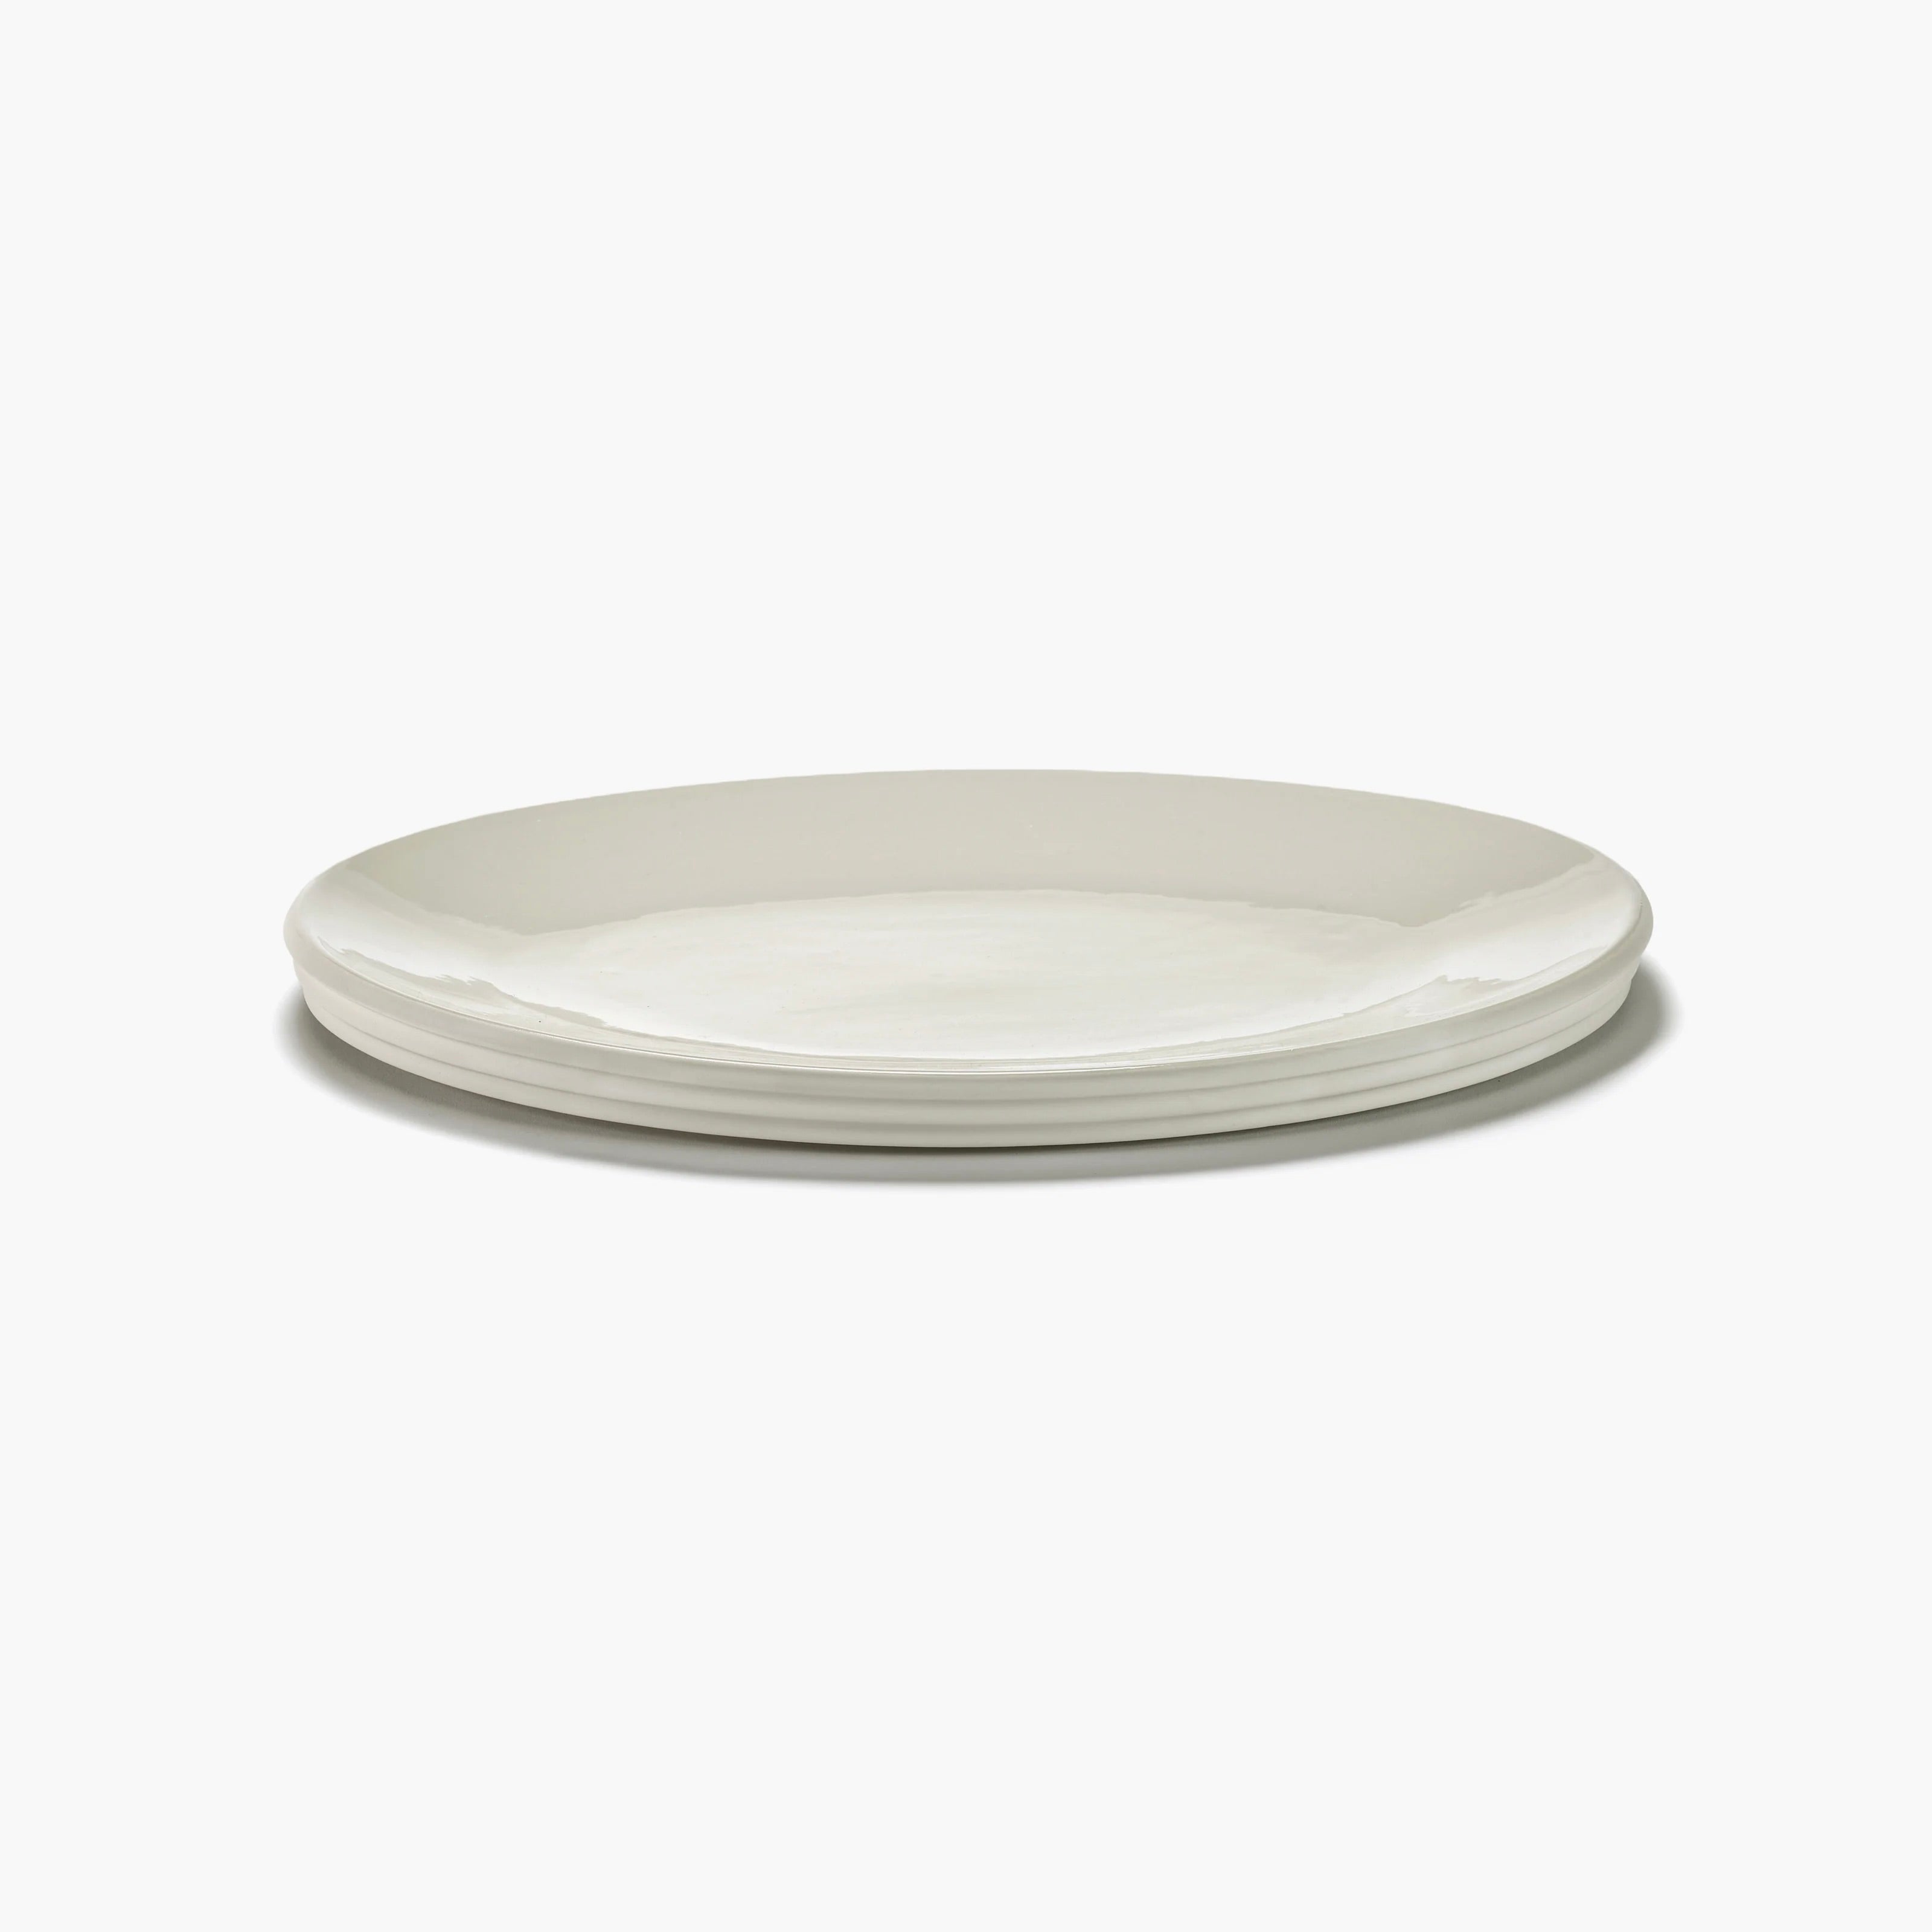 Alabaster Small Oval Dune Serving Dish